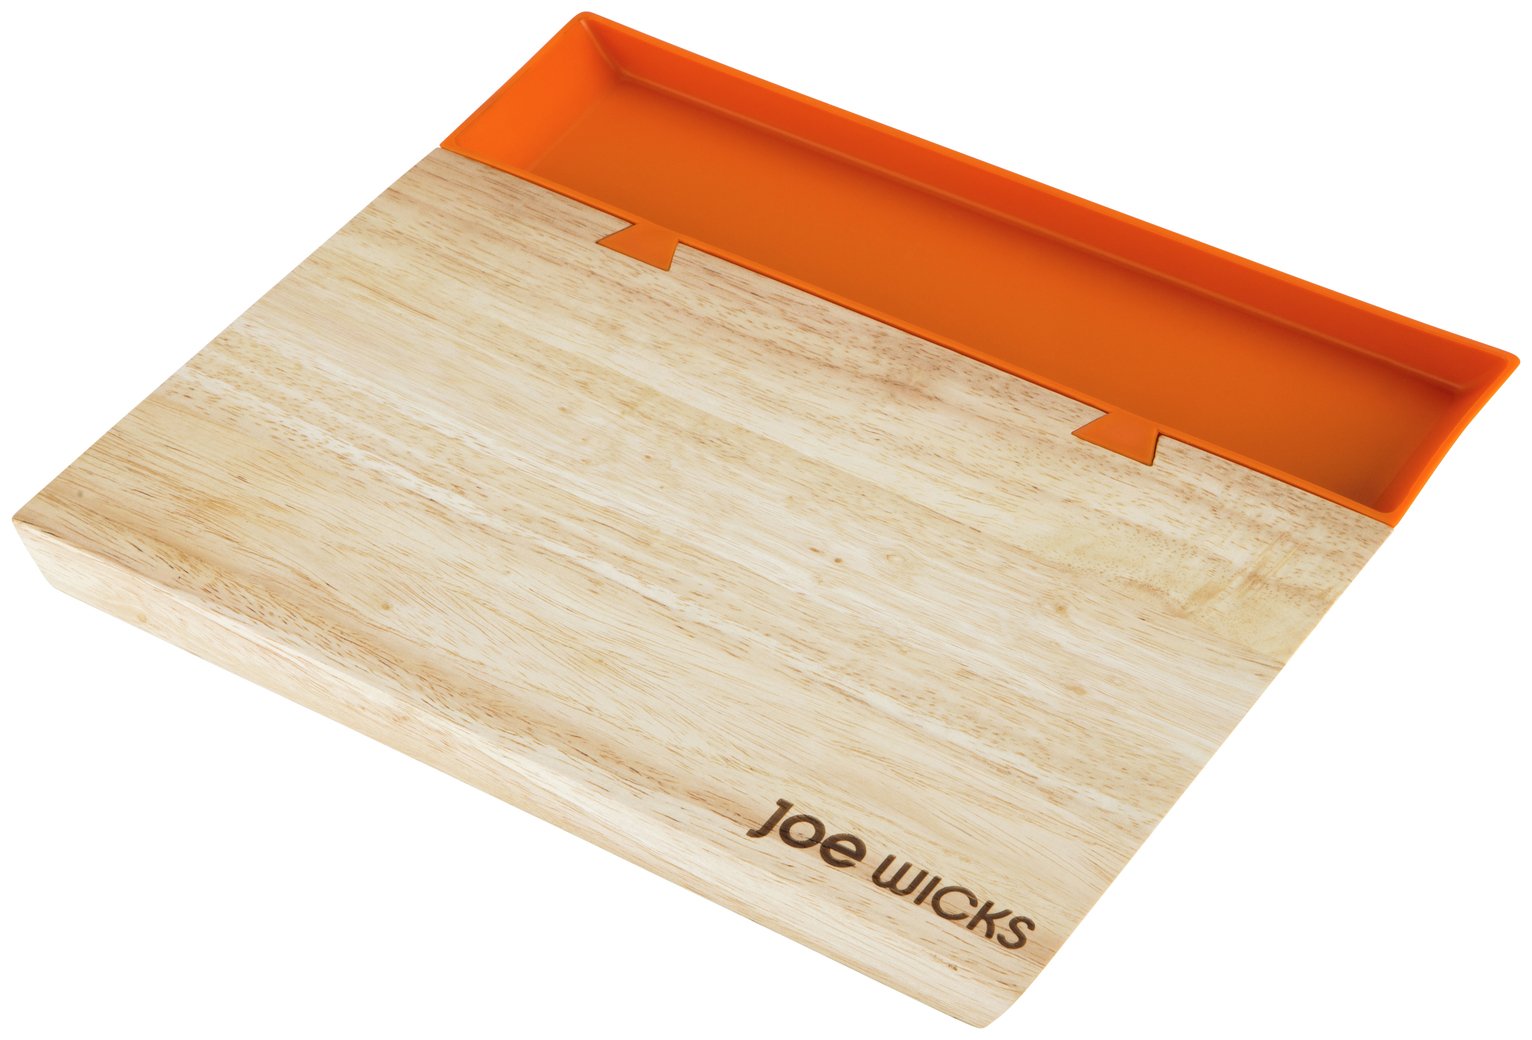 Joe Wicks Chopping Board with Silicone Tray review